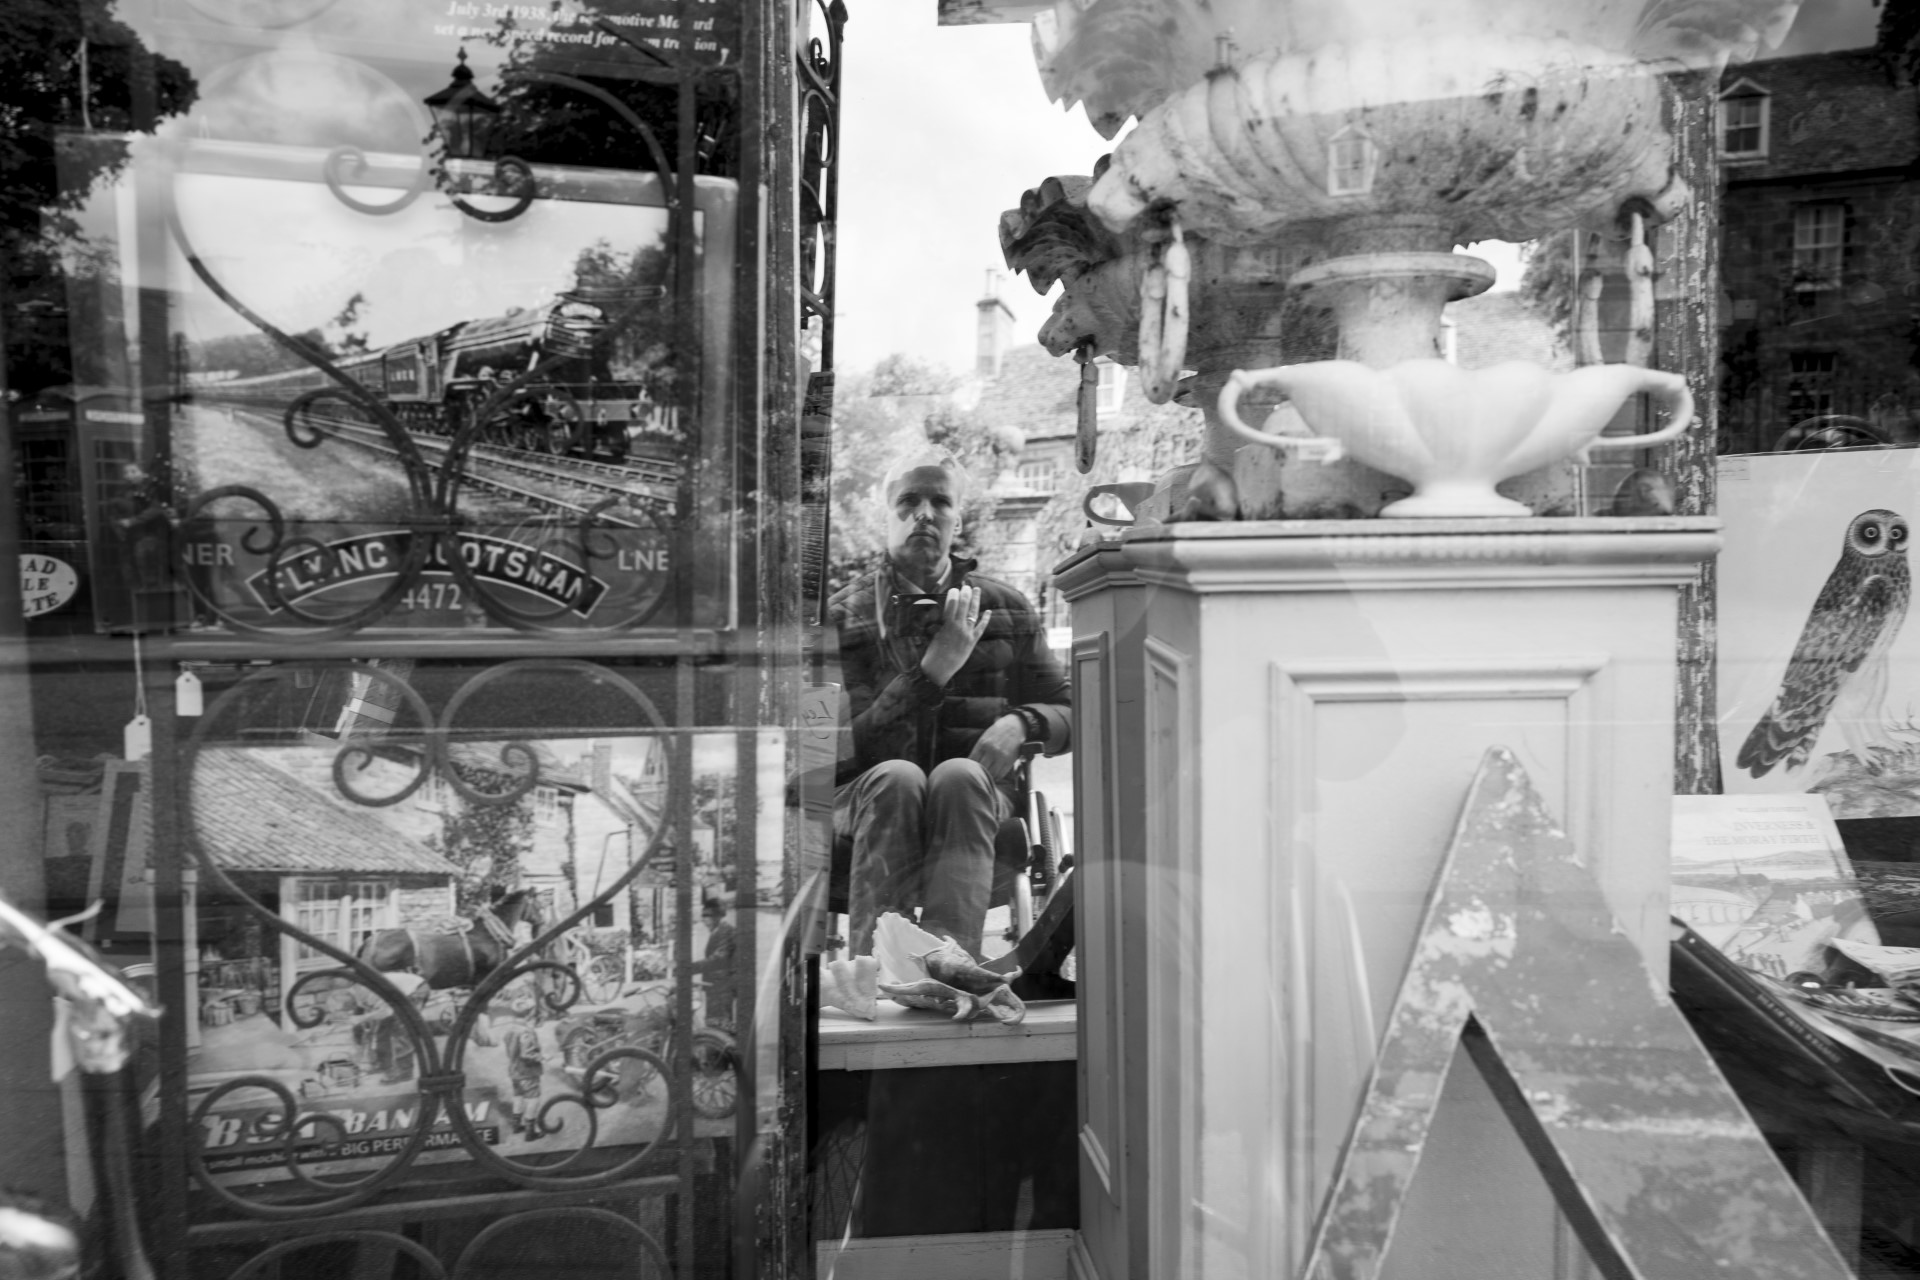 Black and white selfie style image of a man looking into a shop window filled with antiques